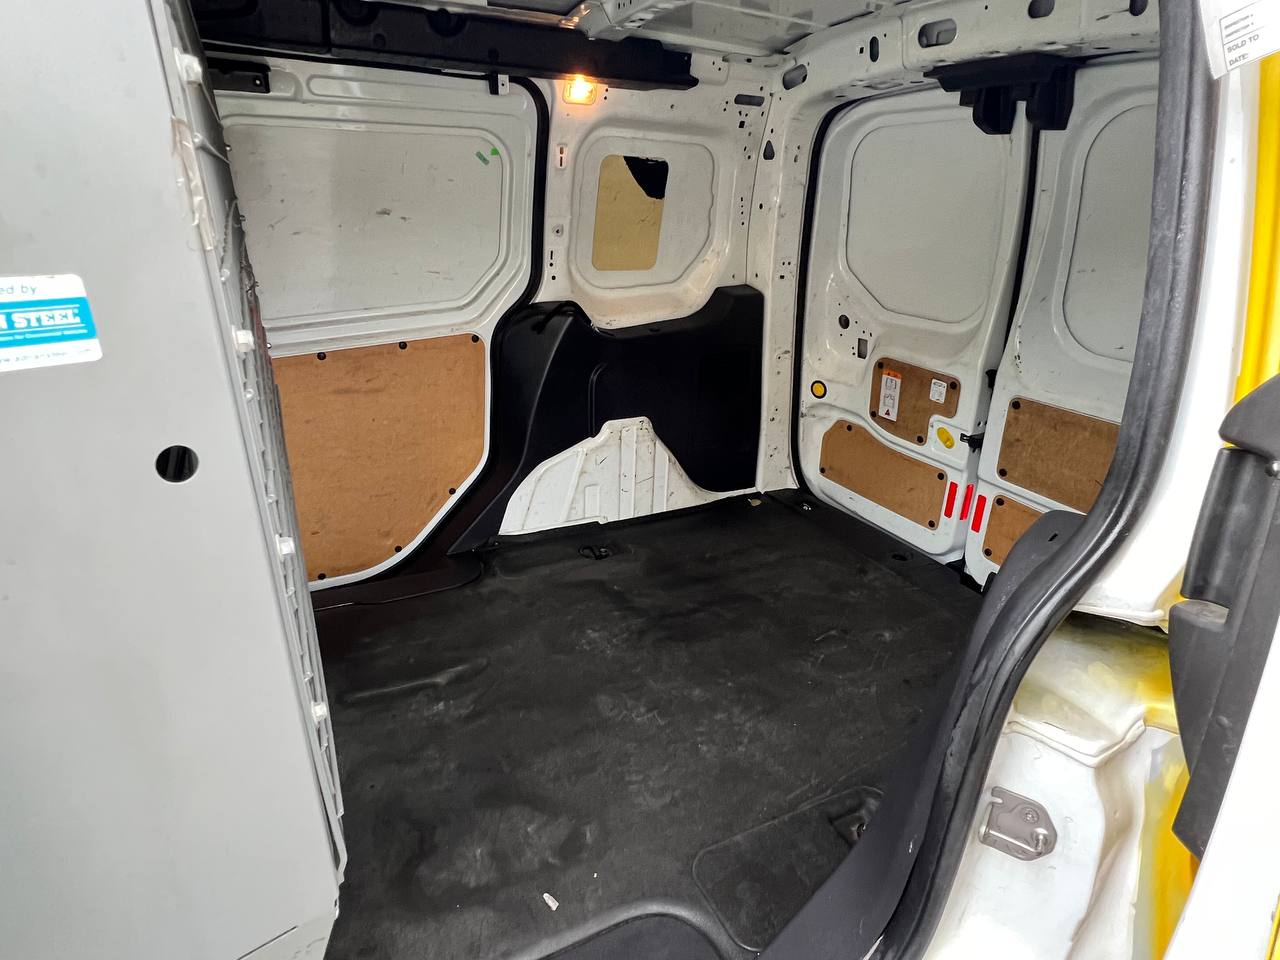 Used - Ford Transit Connect XL CARGO VAN for sale in Staten Island NY